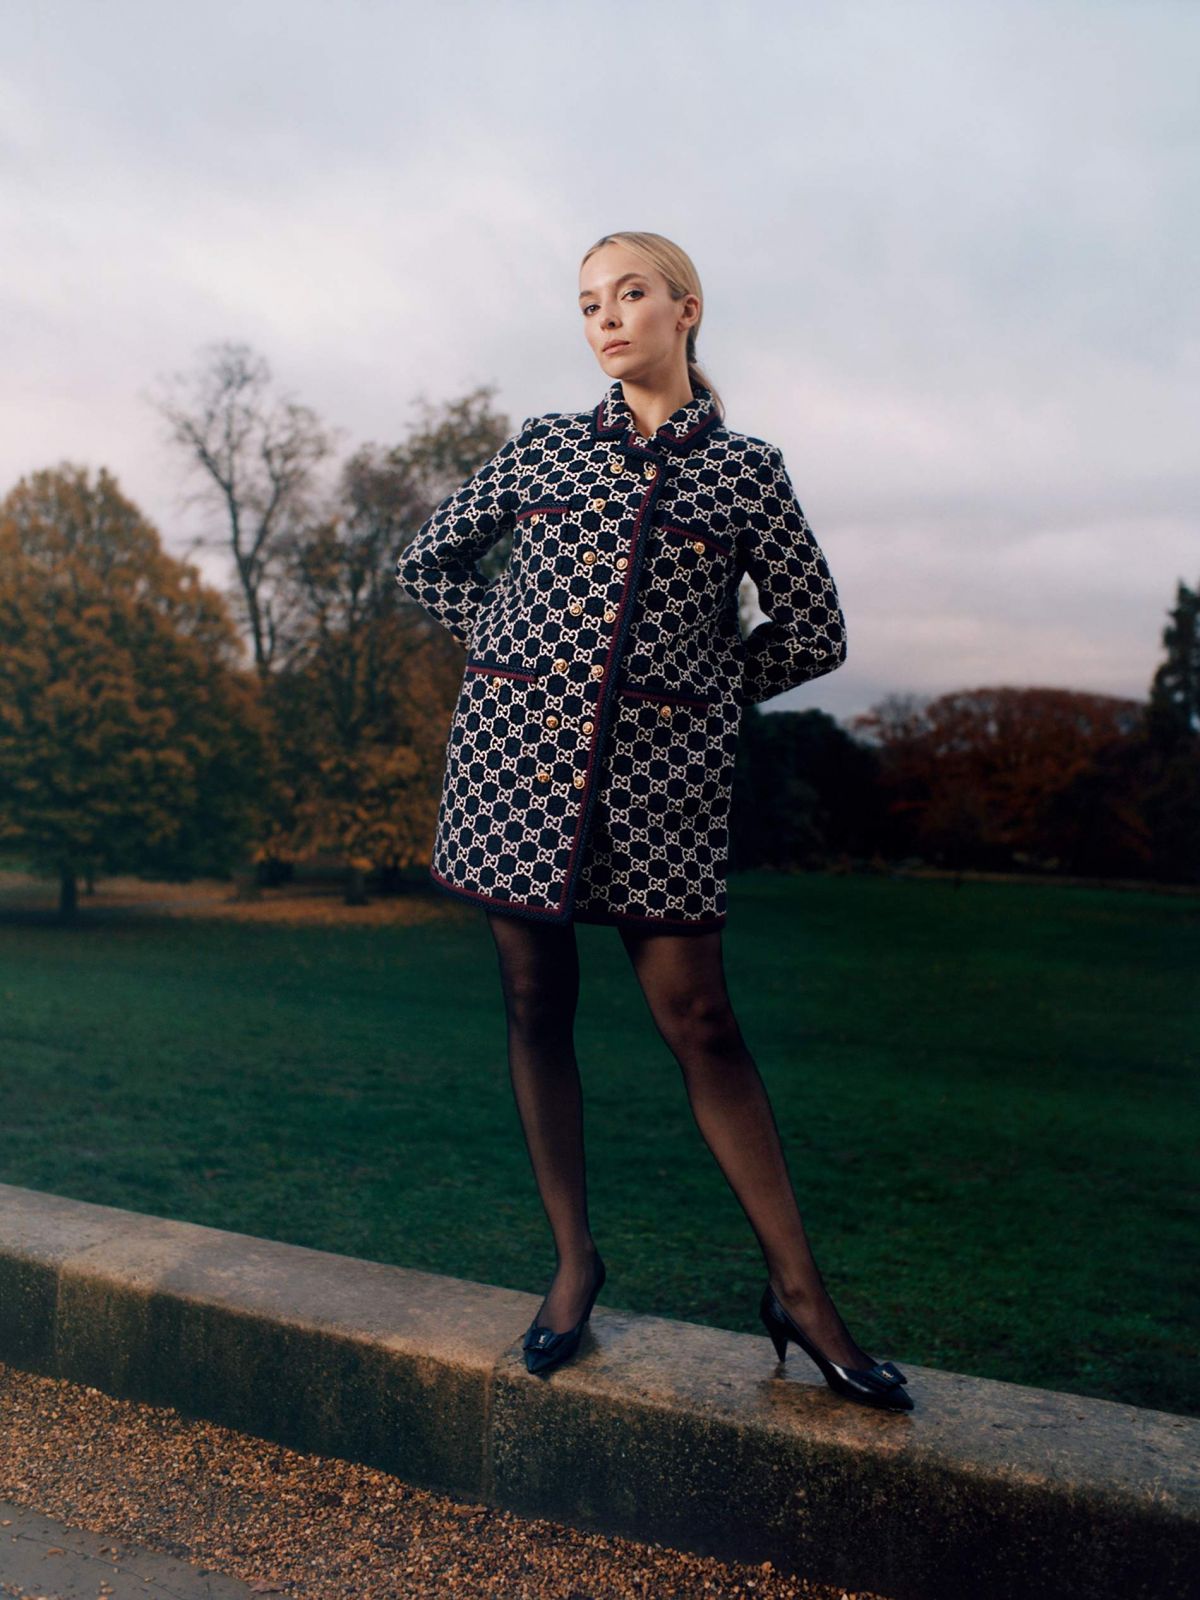 Jodie Comer Photoshoot for The Edit by Net-a-porter, November 2020